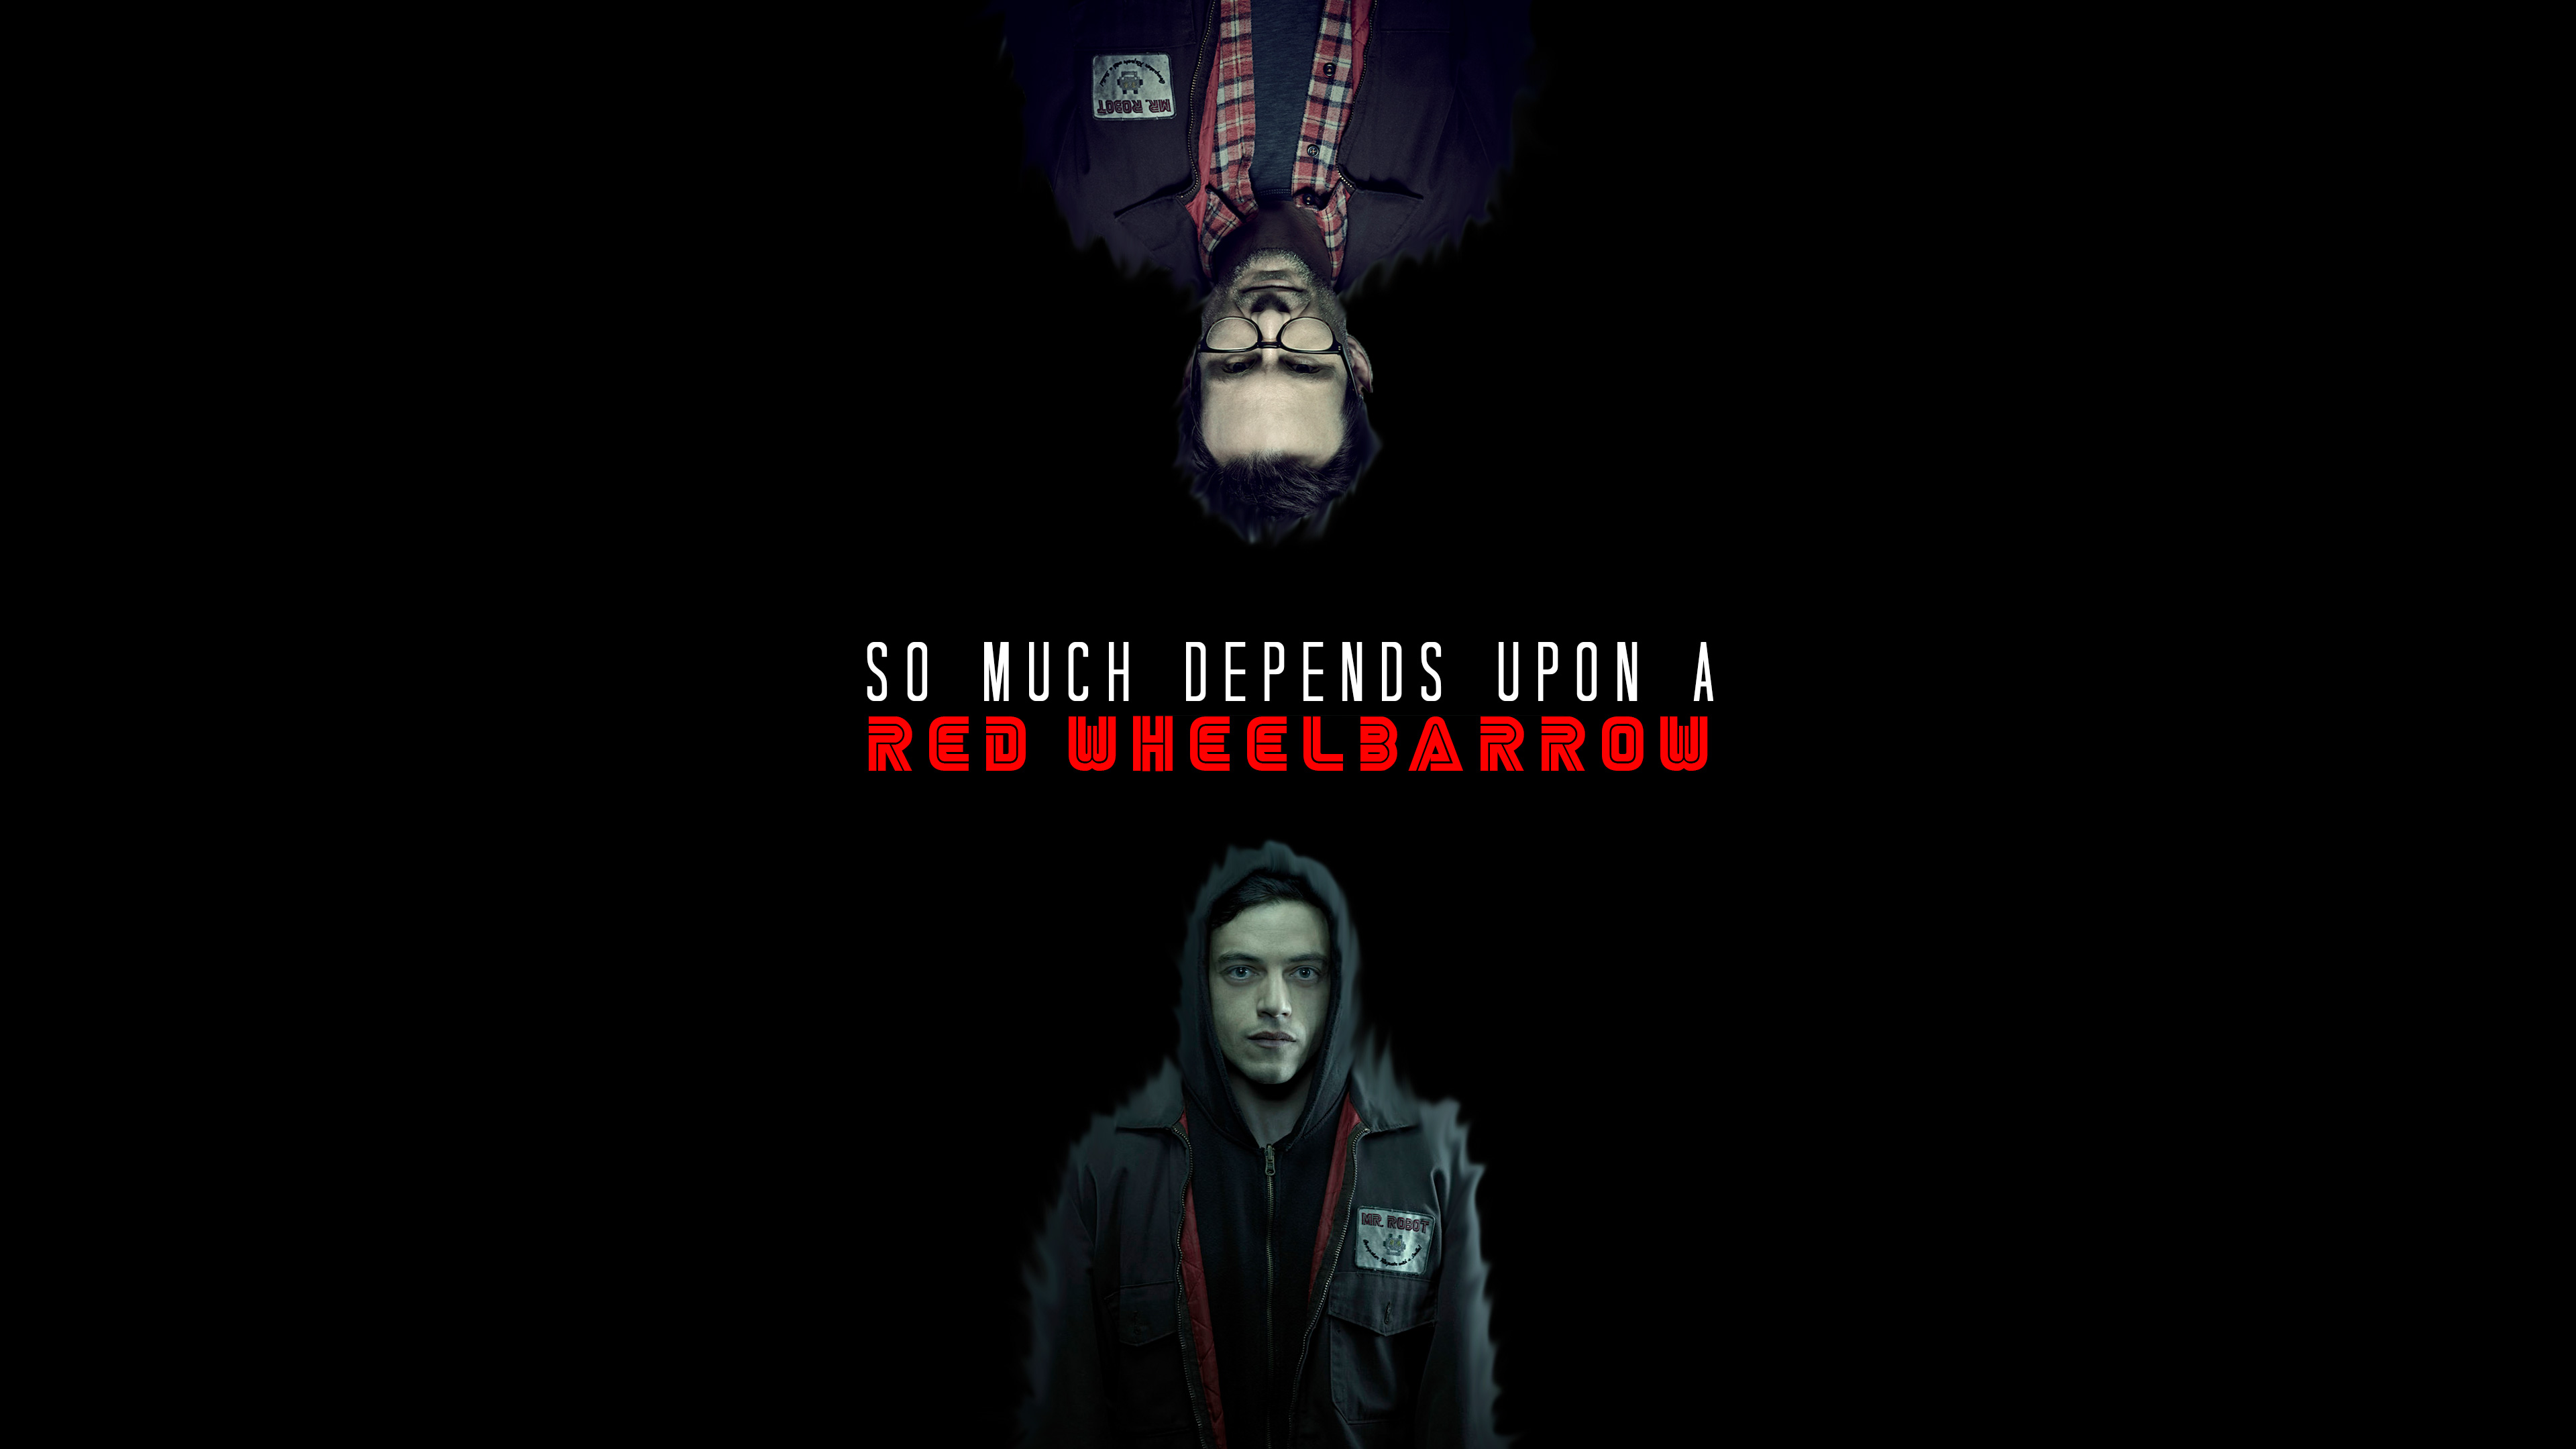 Mr. Robot Wallpapers in 2023  Robot wallpaper, Mr robot poster